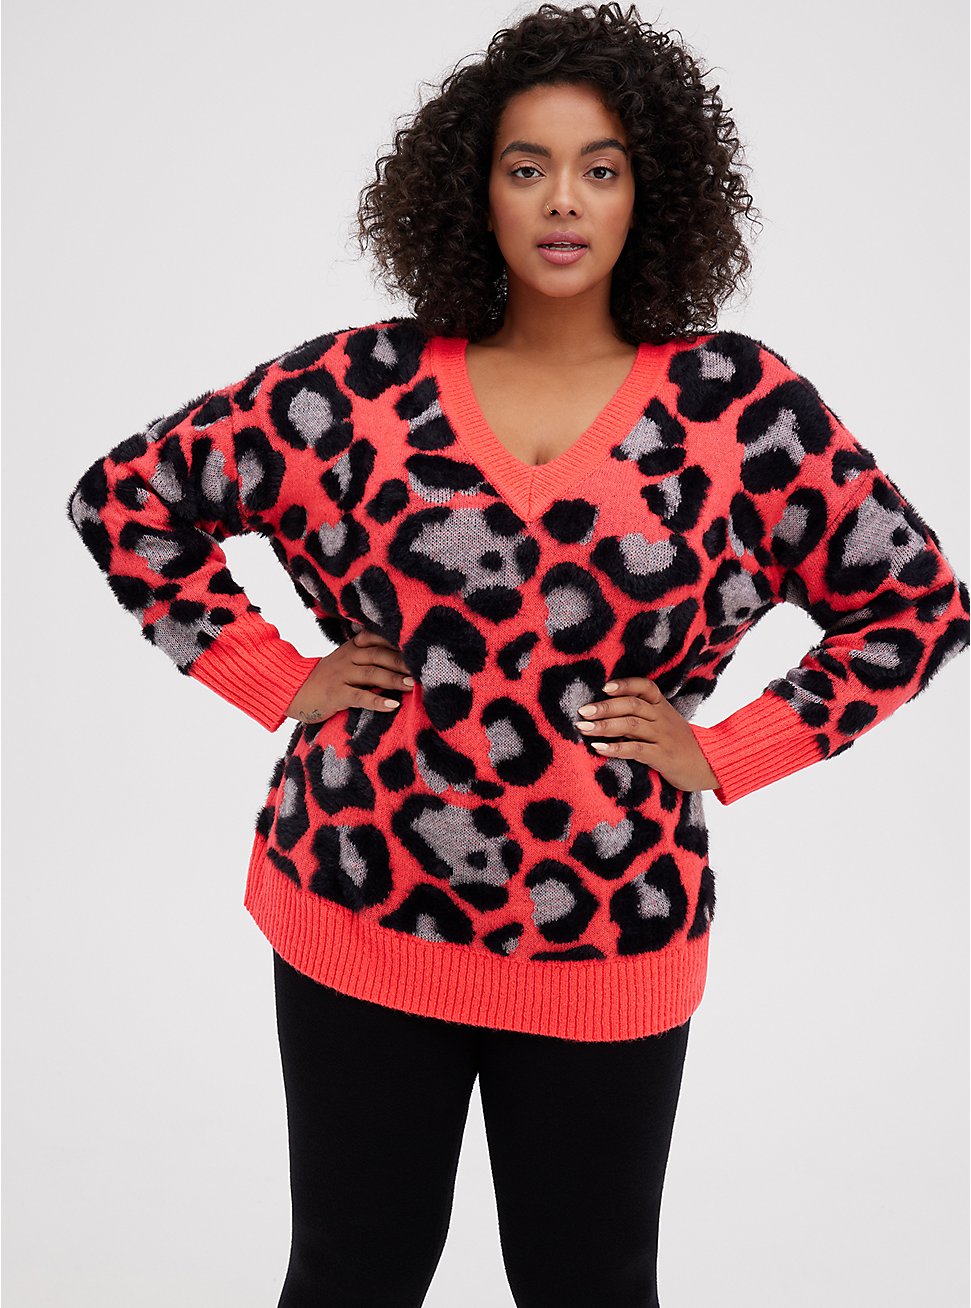 Slouchy Tunic Pullover Sweater - Leopard Print Coral , MULTI, hi-res